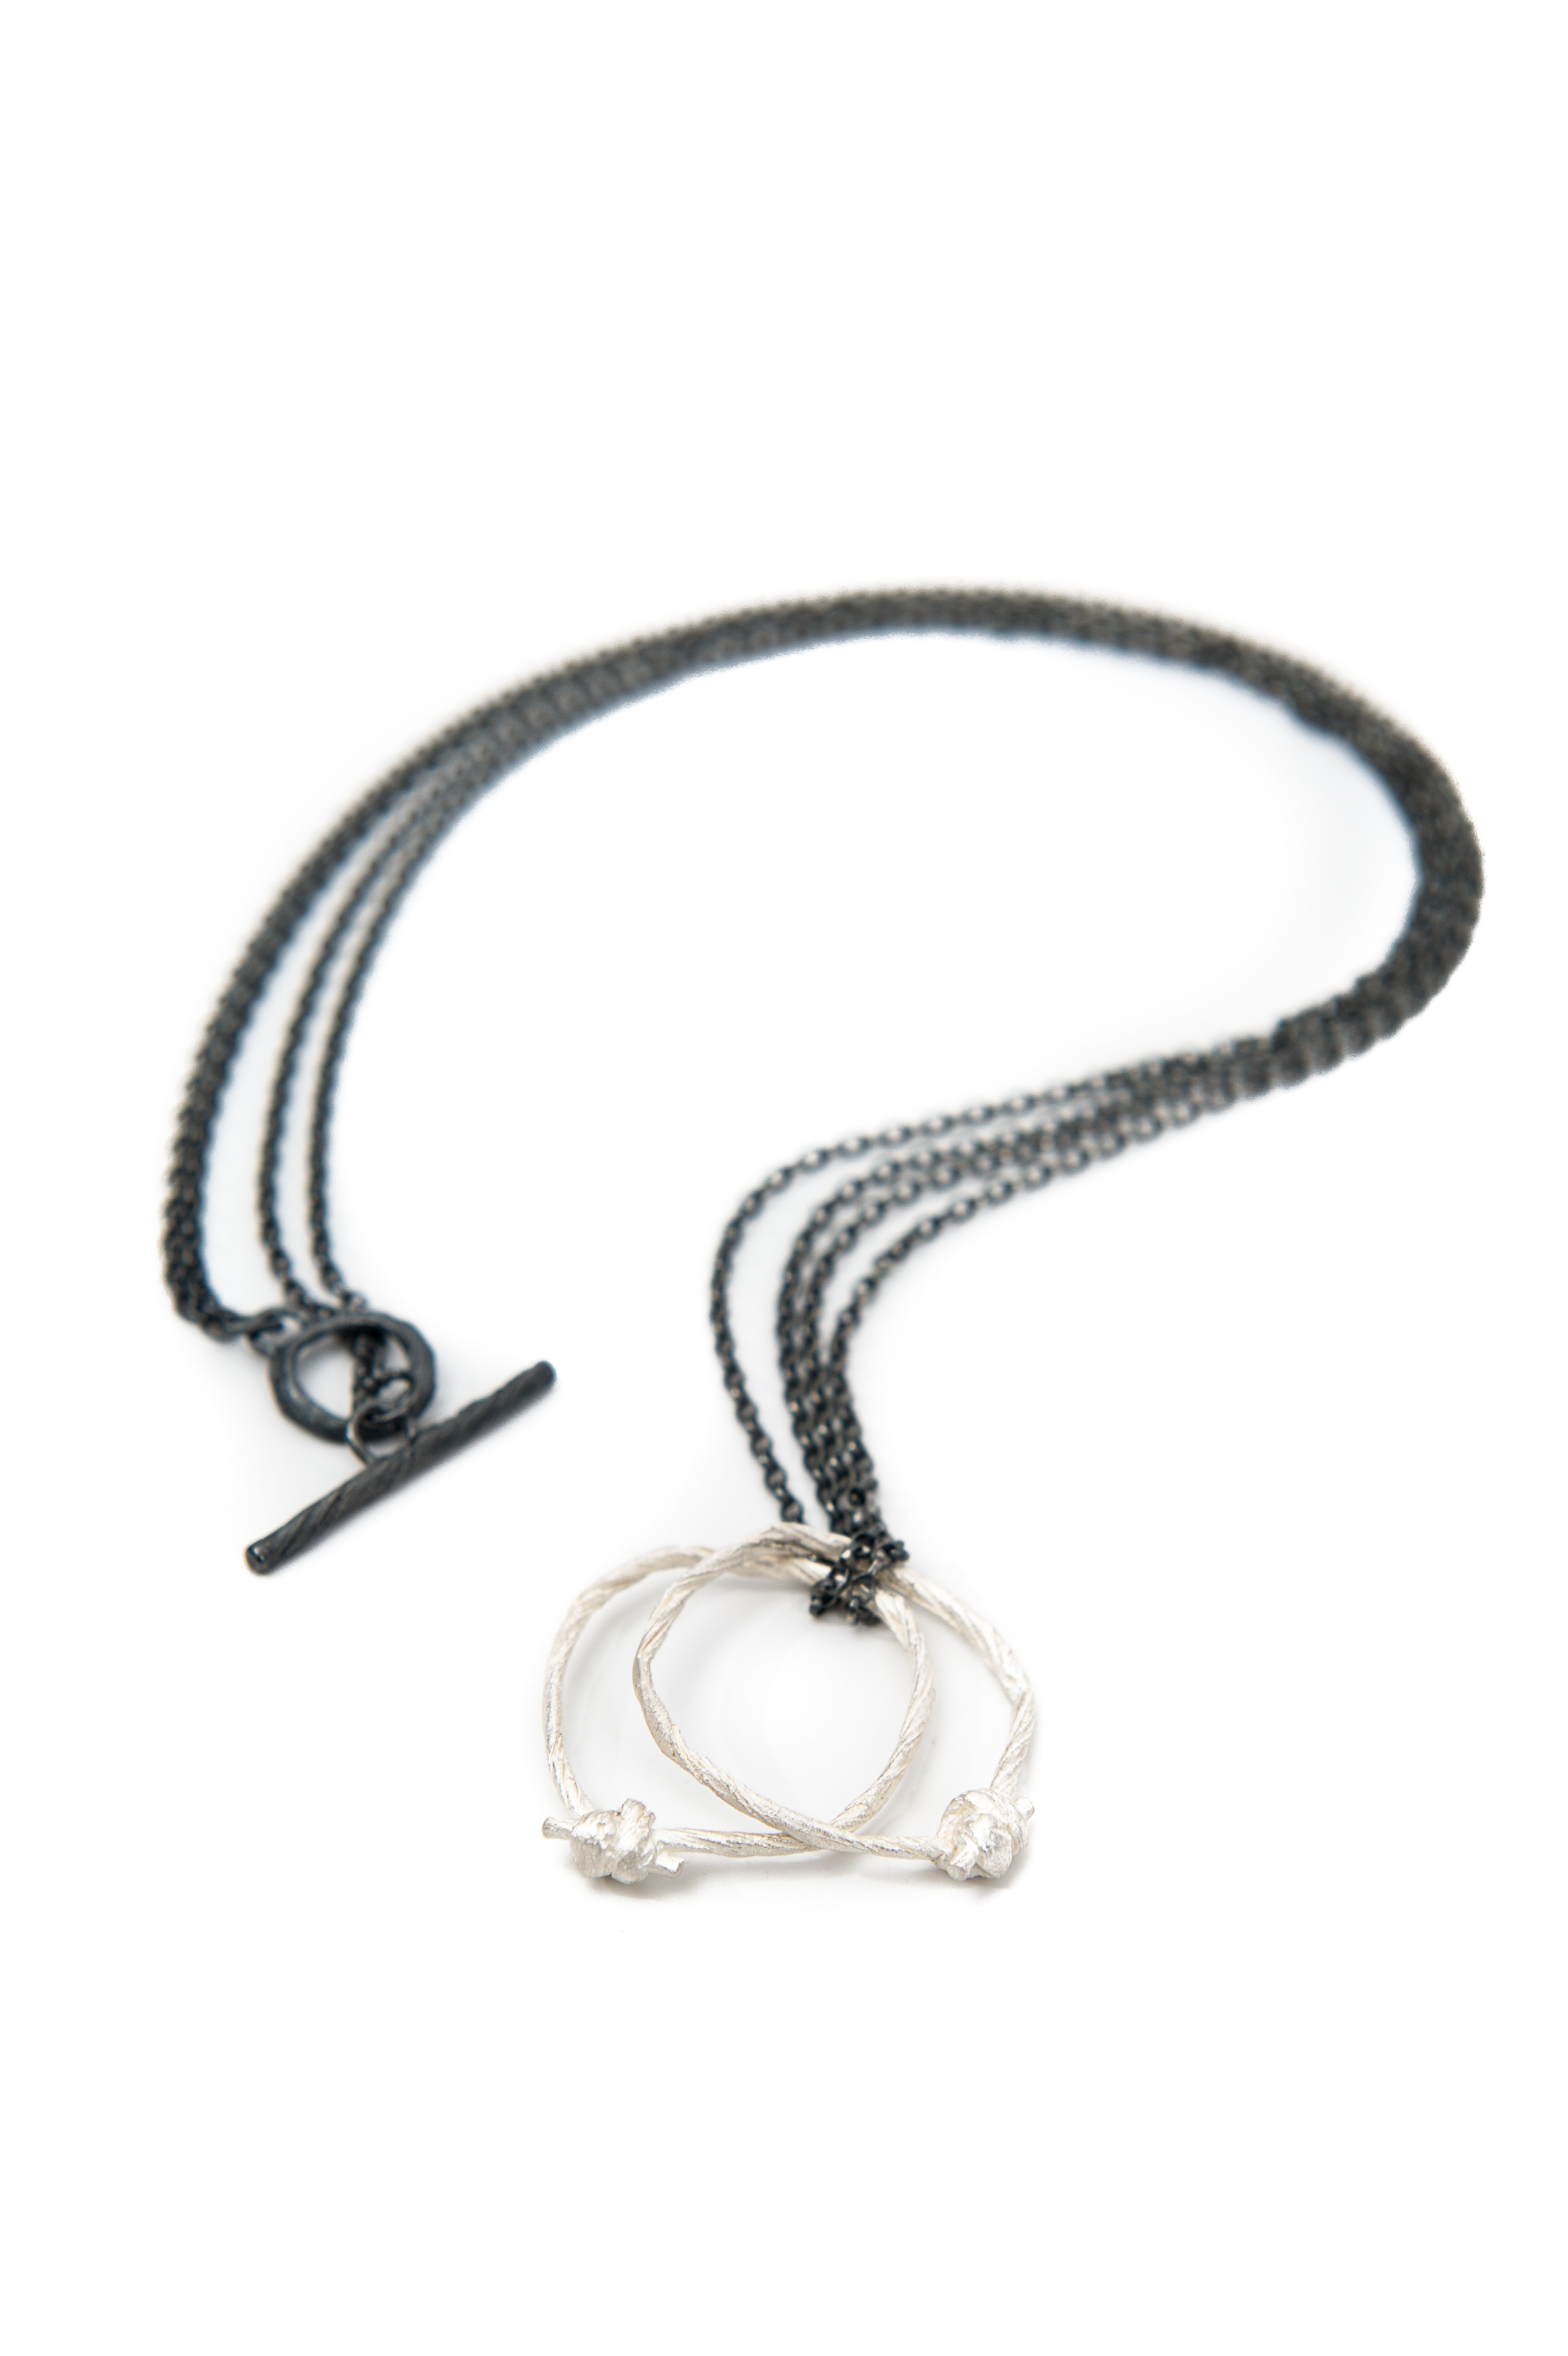 knotted string pendant on chain | Necklaces / Pendants by Antonella ...